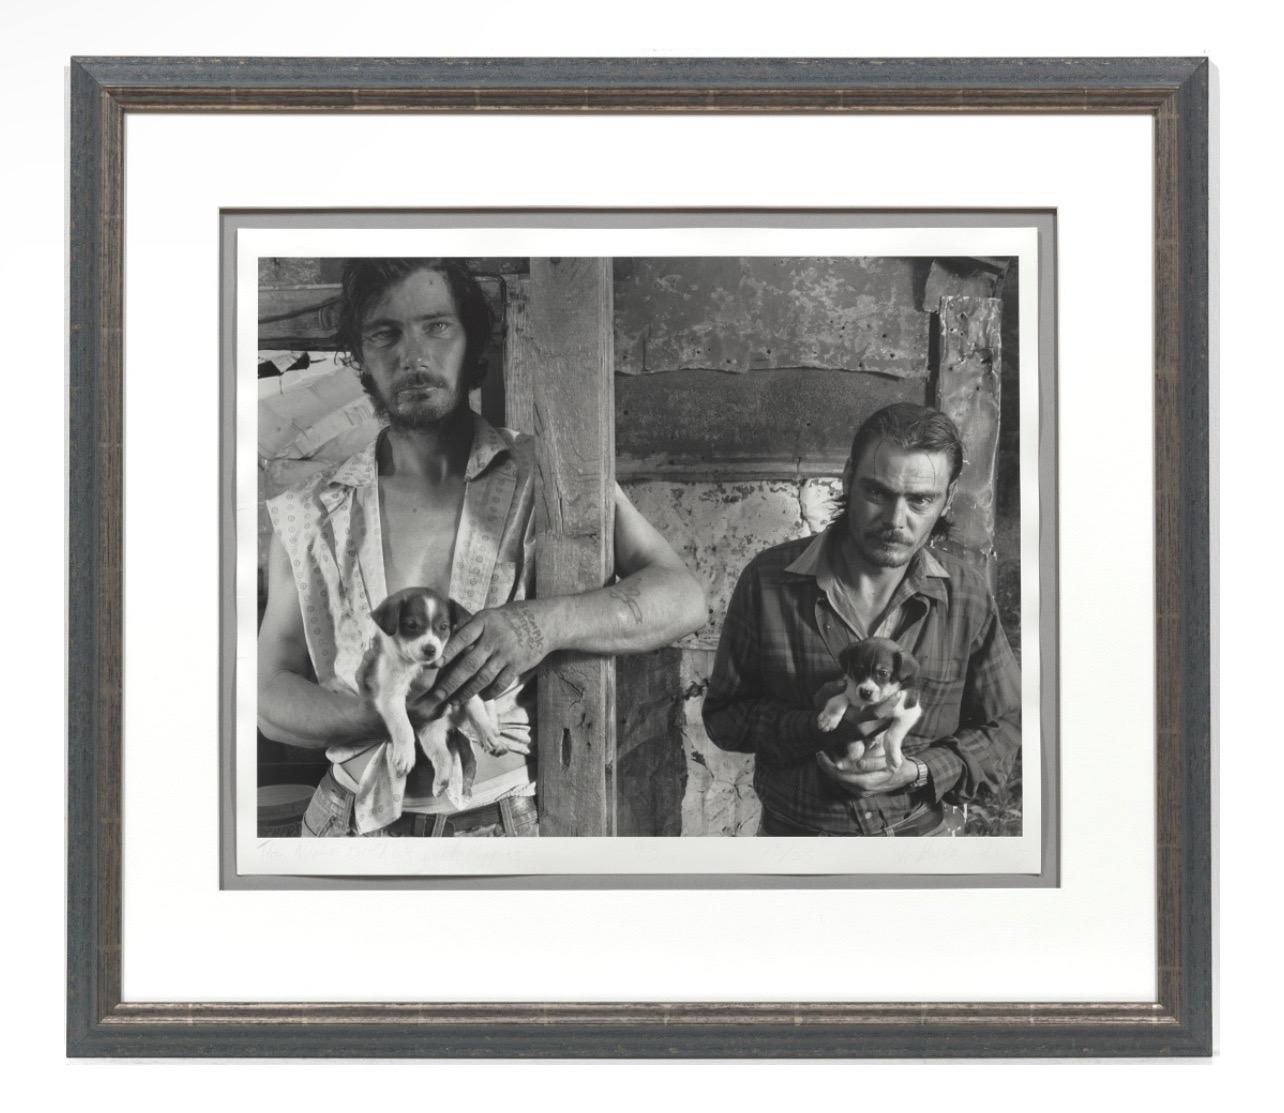 Shelby Lee Adams (American, b. 1950).
The Napier brothers with Puppies
Silver gelatin print, 25/25.
Signed in pencil lower left, titled and dated 1993.
Dimensions: 16